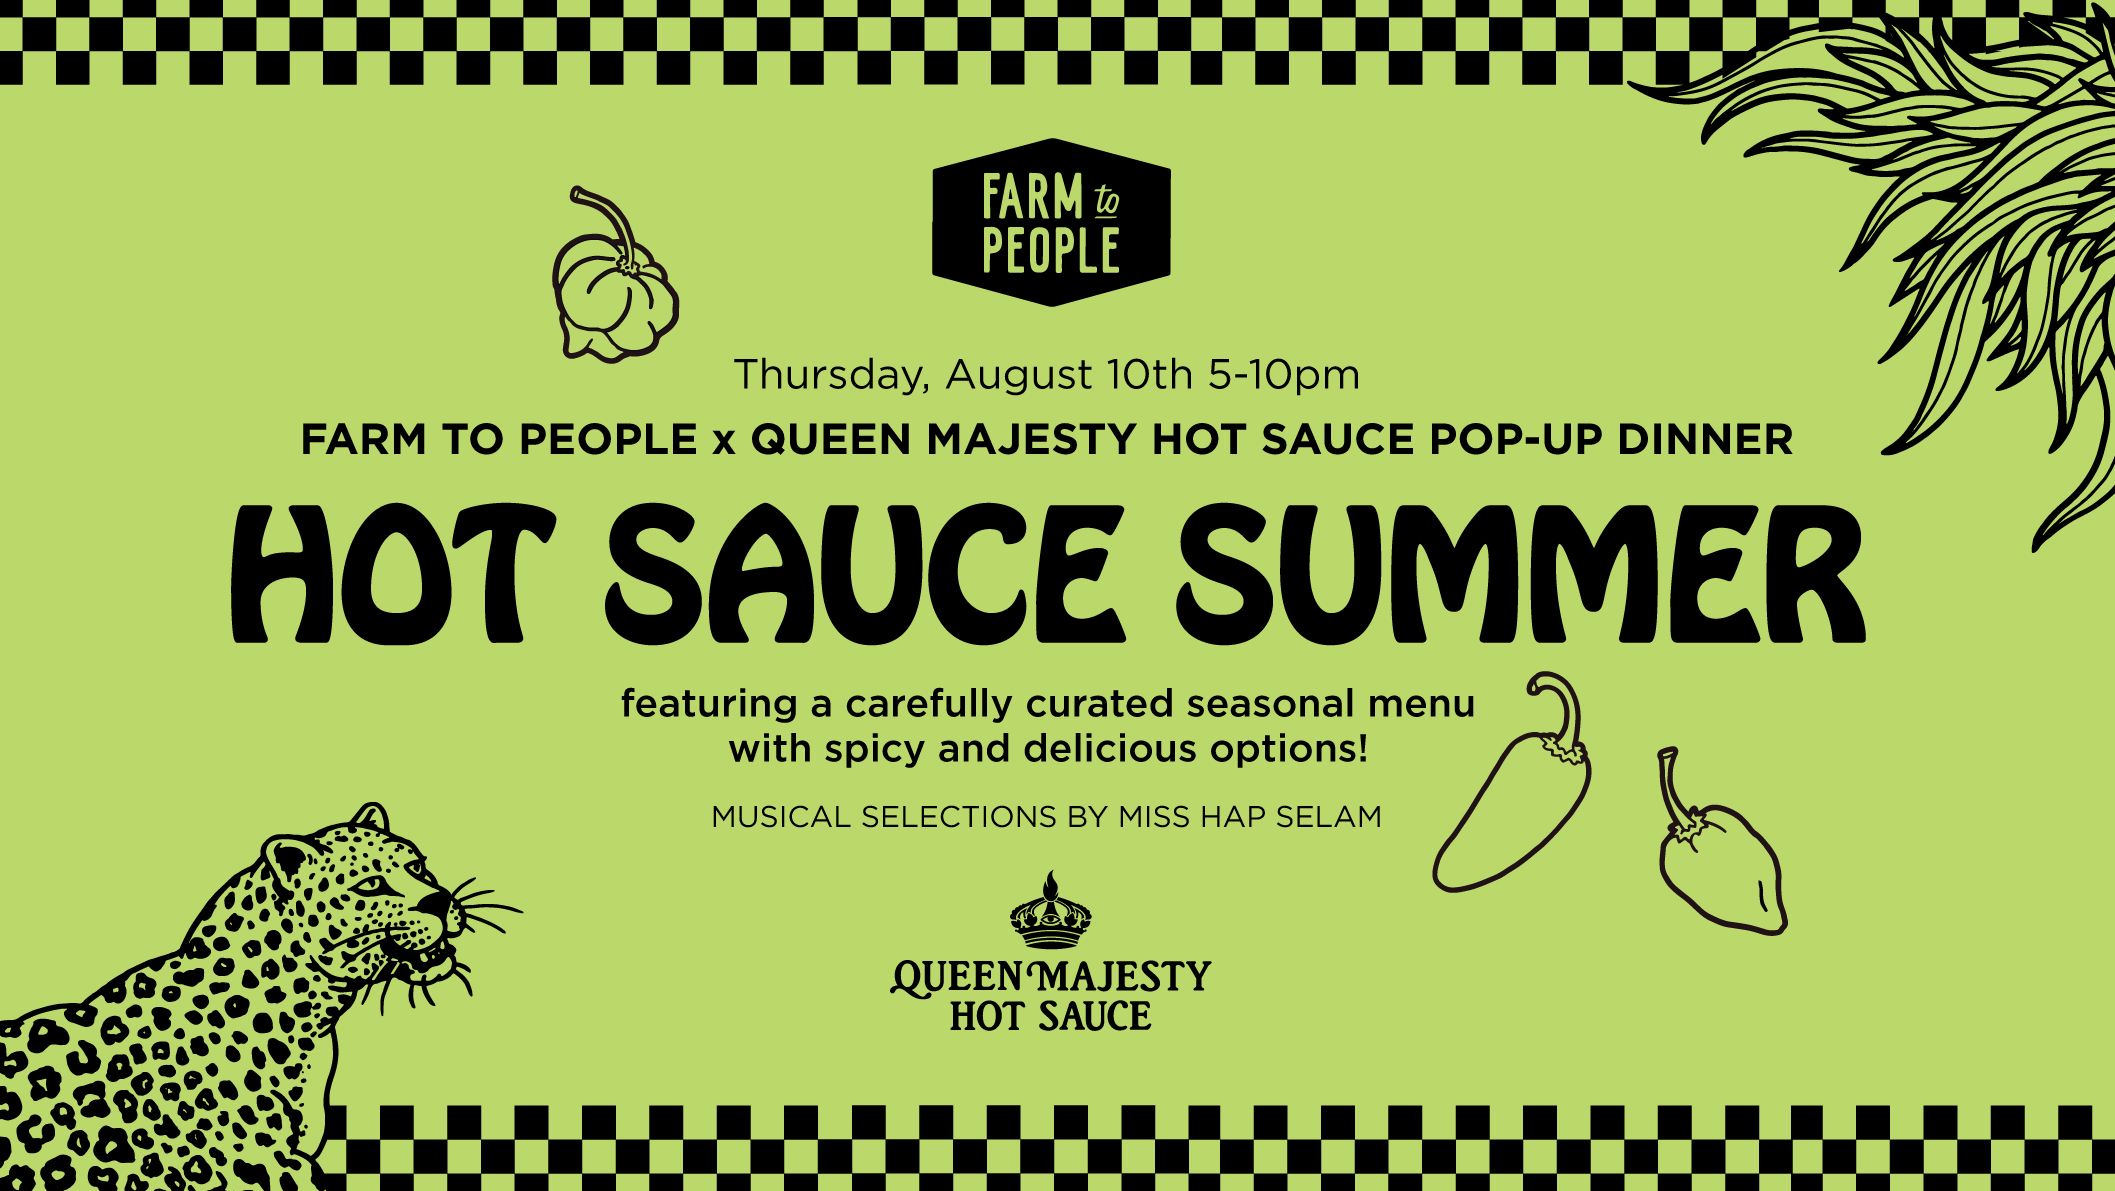 Hot Sauce Summer Pop-up with Queen Majesty Hot Sauce